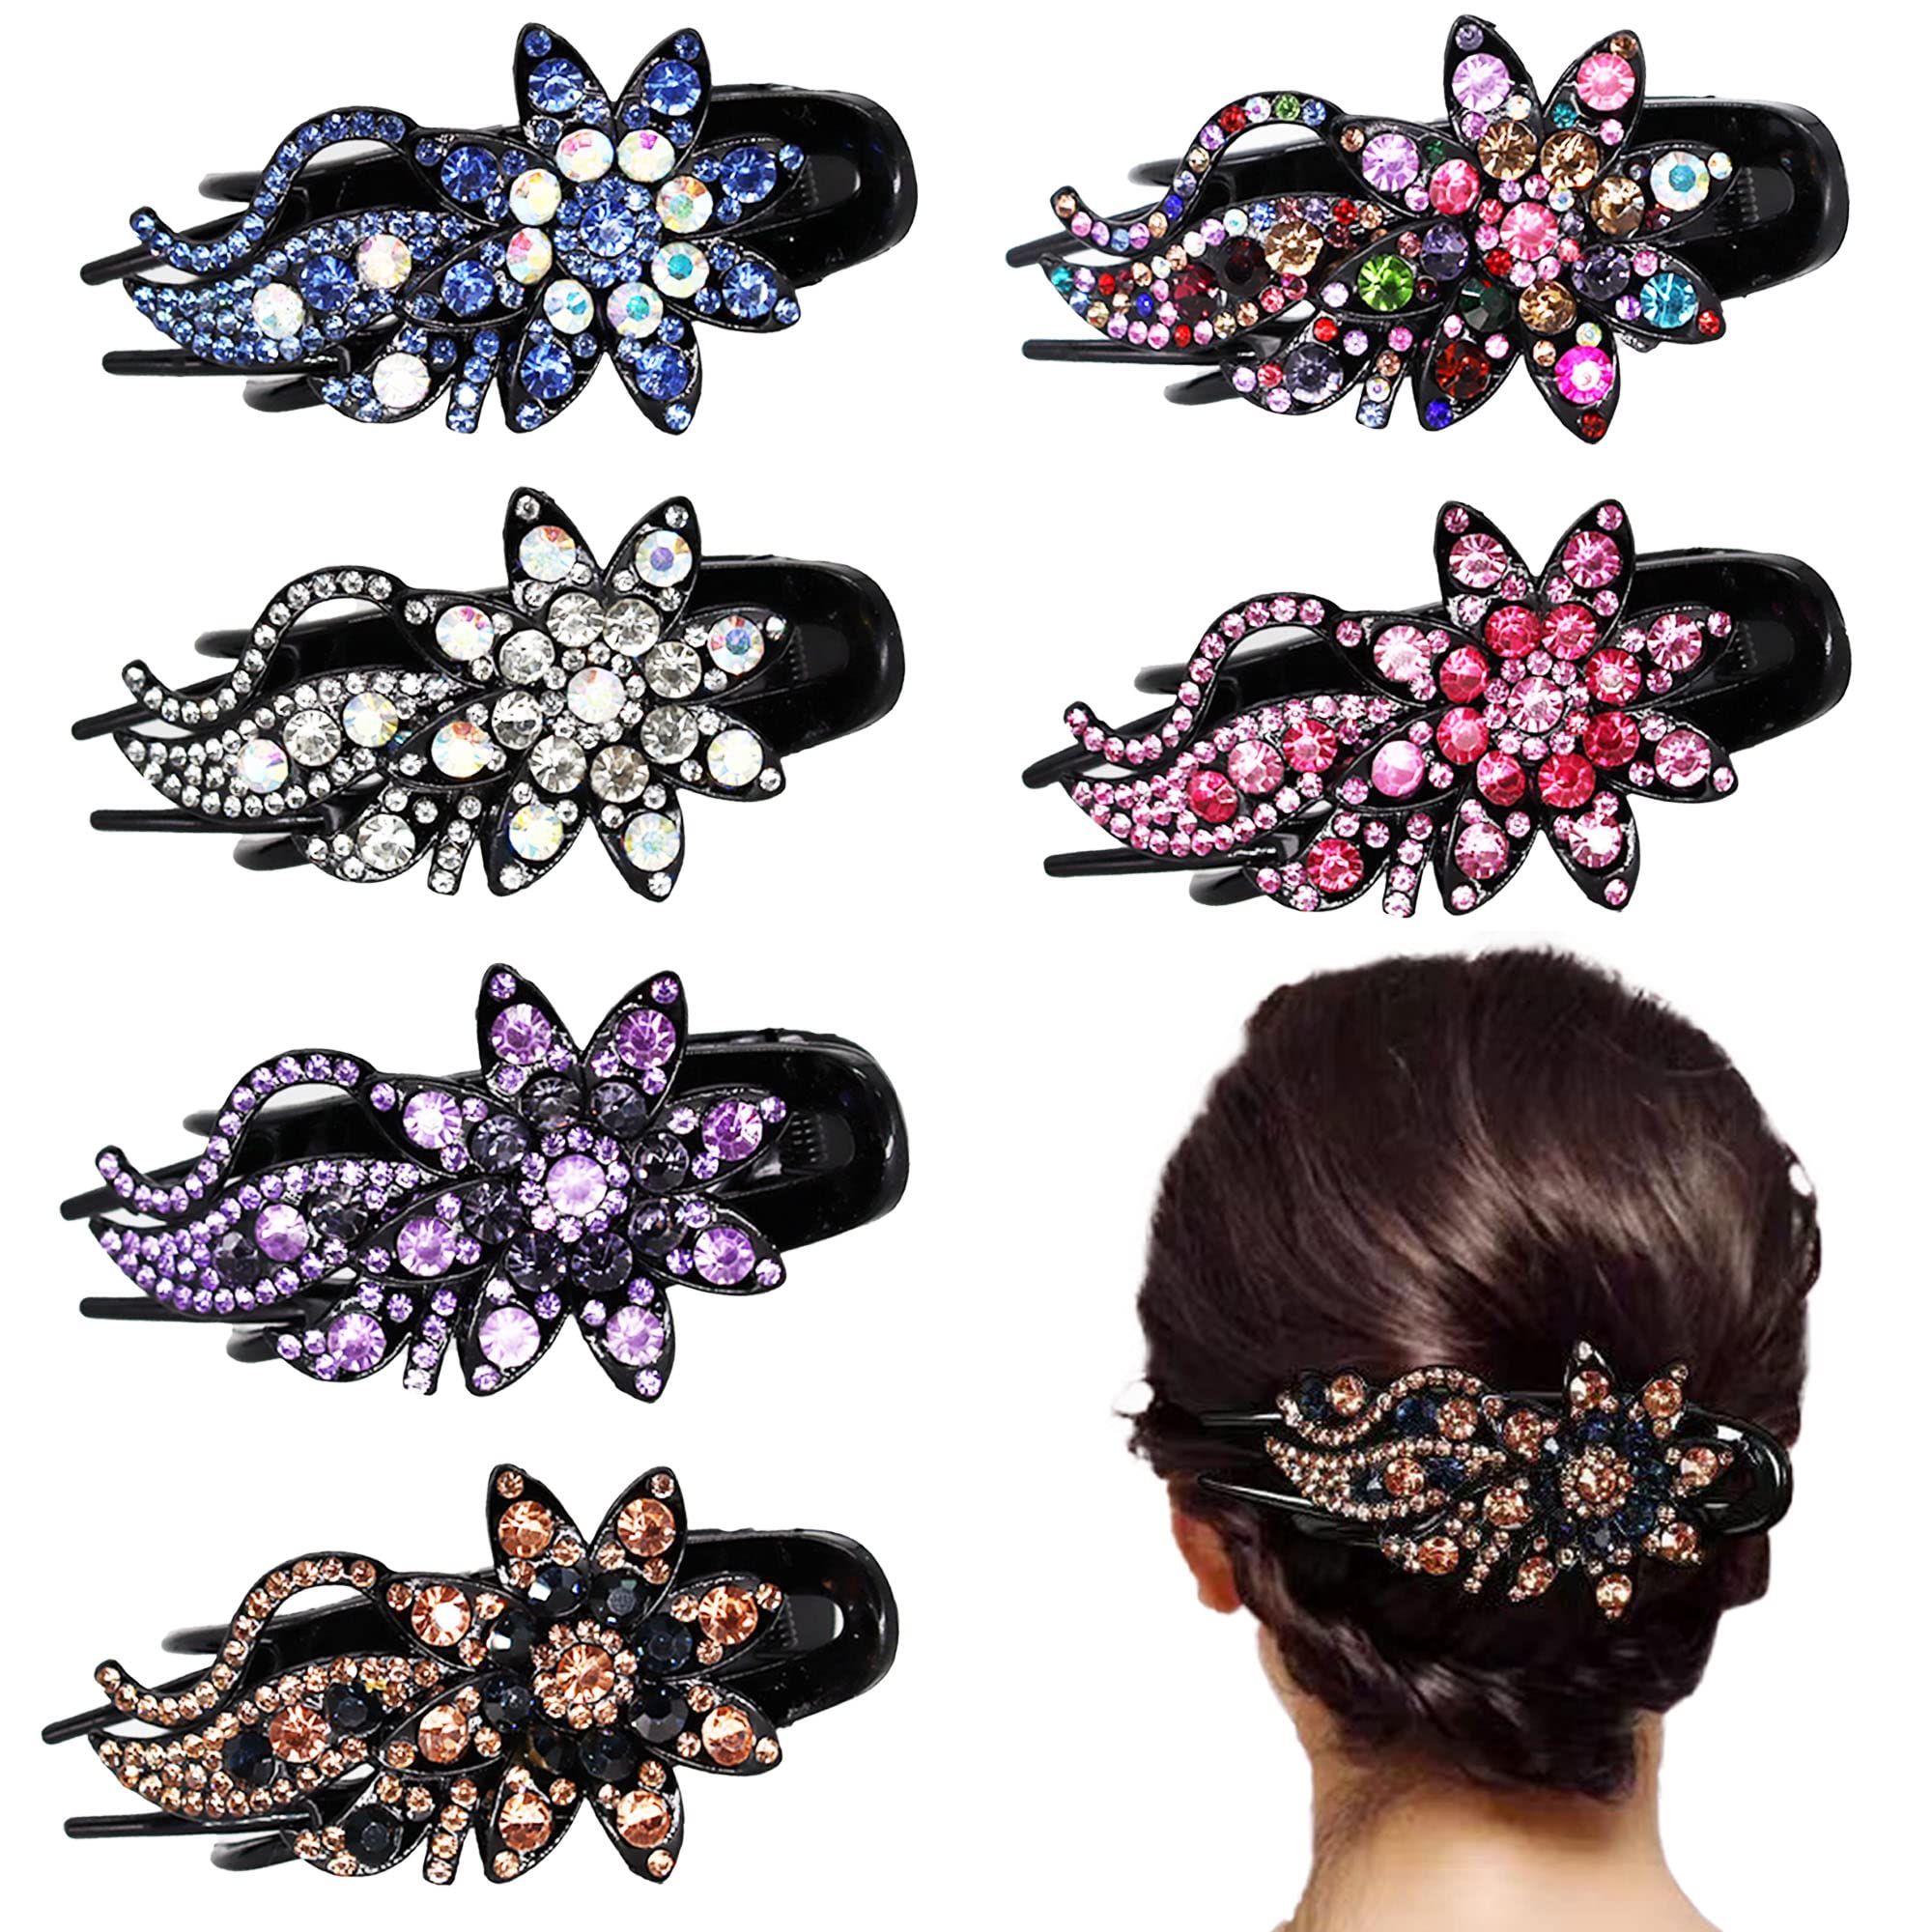 2pcs Crystal Rhinestone Hair Clips, Sparkly Diamante Hair Clips For Women  Girls,ponytail Hair Clips Hair Accessories For Wedding